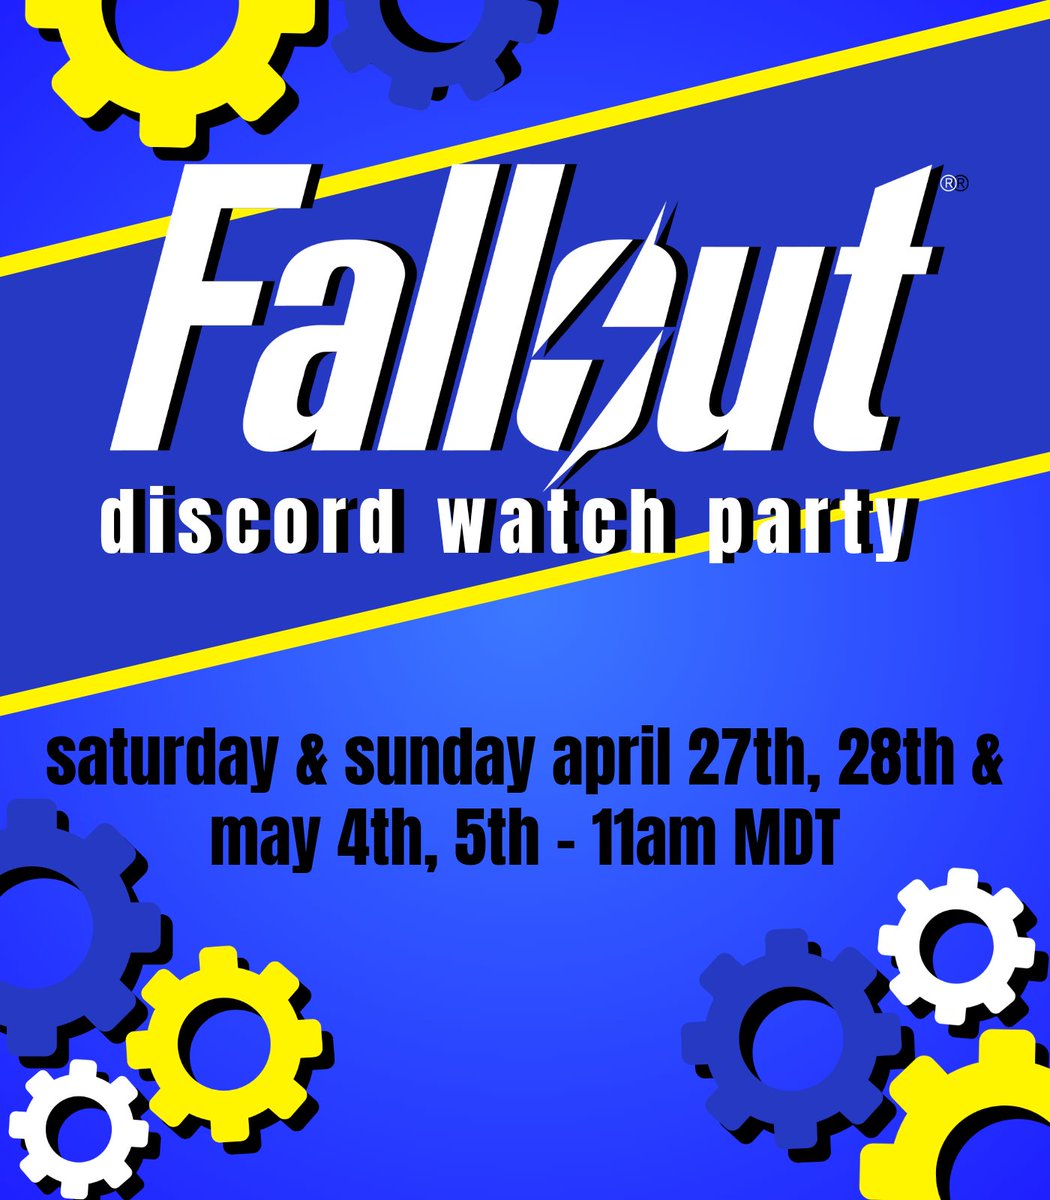 Hosting a Fallout watch party in my discord starting this weekend 💛 All viewings will take place on Saturday & Sunday, there's 8 episodes total so we'll watch 2 each day 🫡✨️